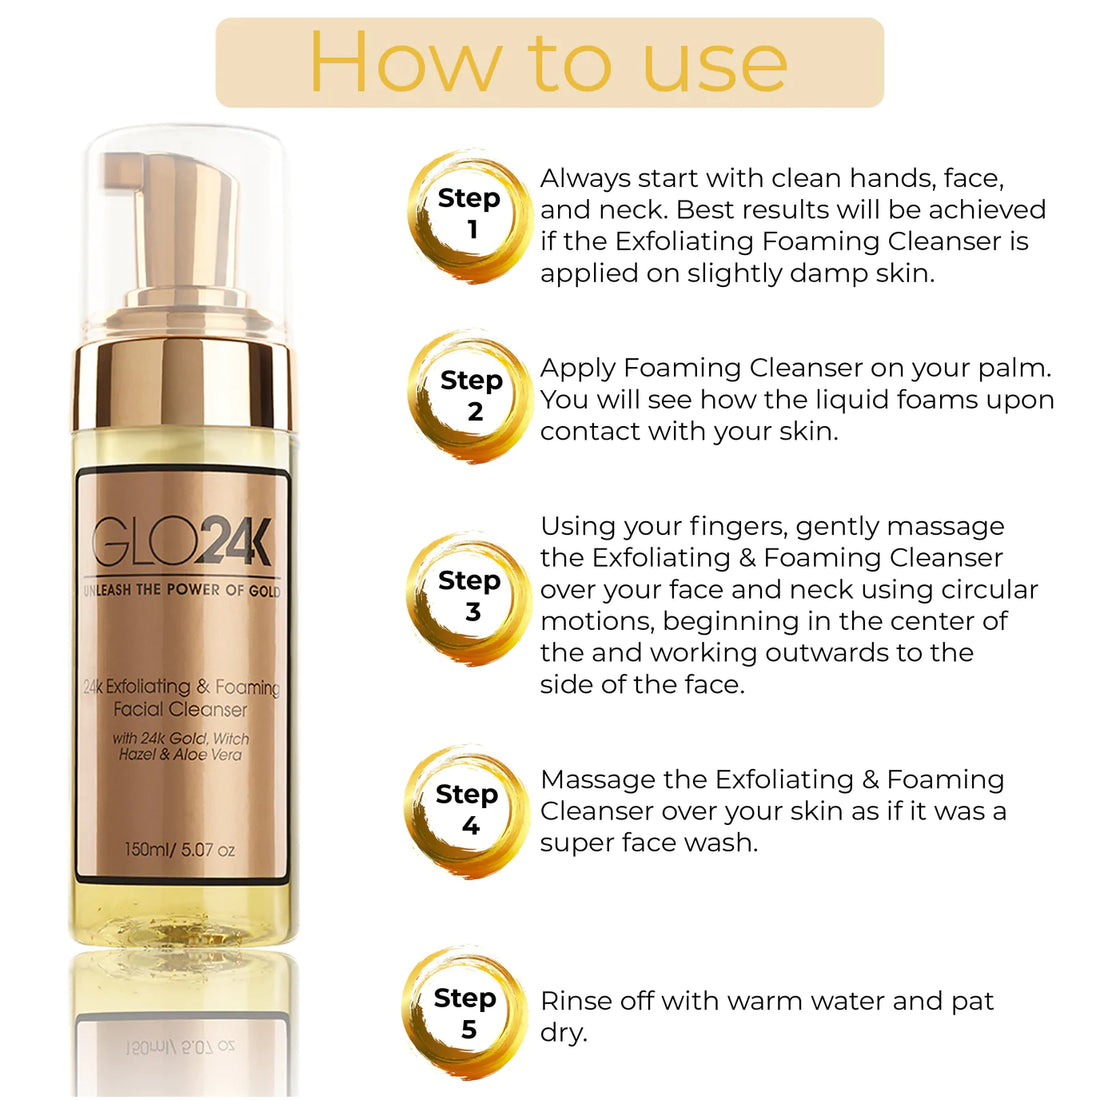 How to use GLO24K 24K Exfoliating & Foaming Facial Cleanser